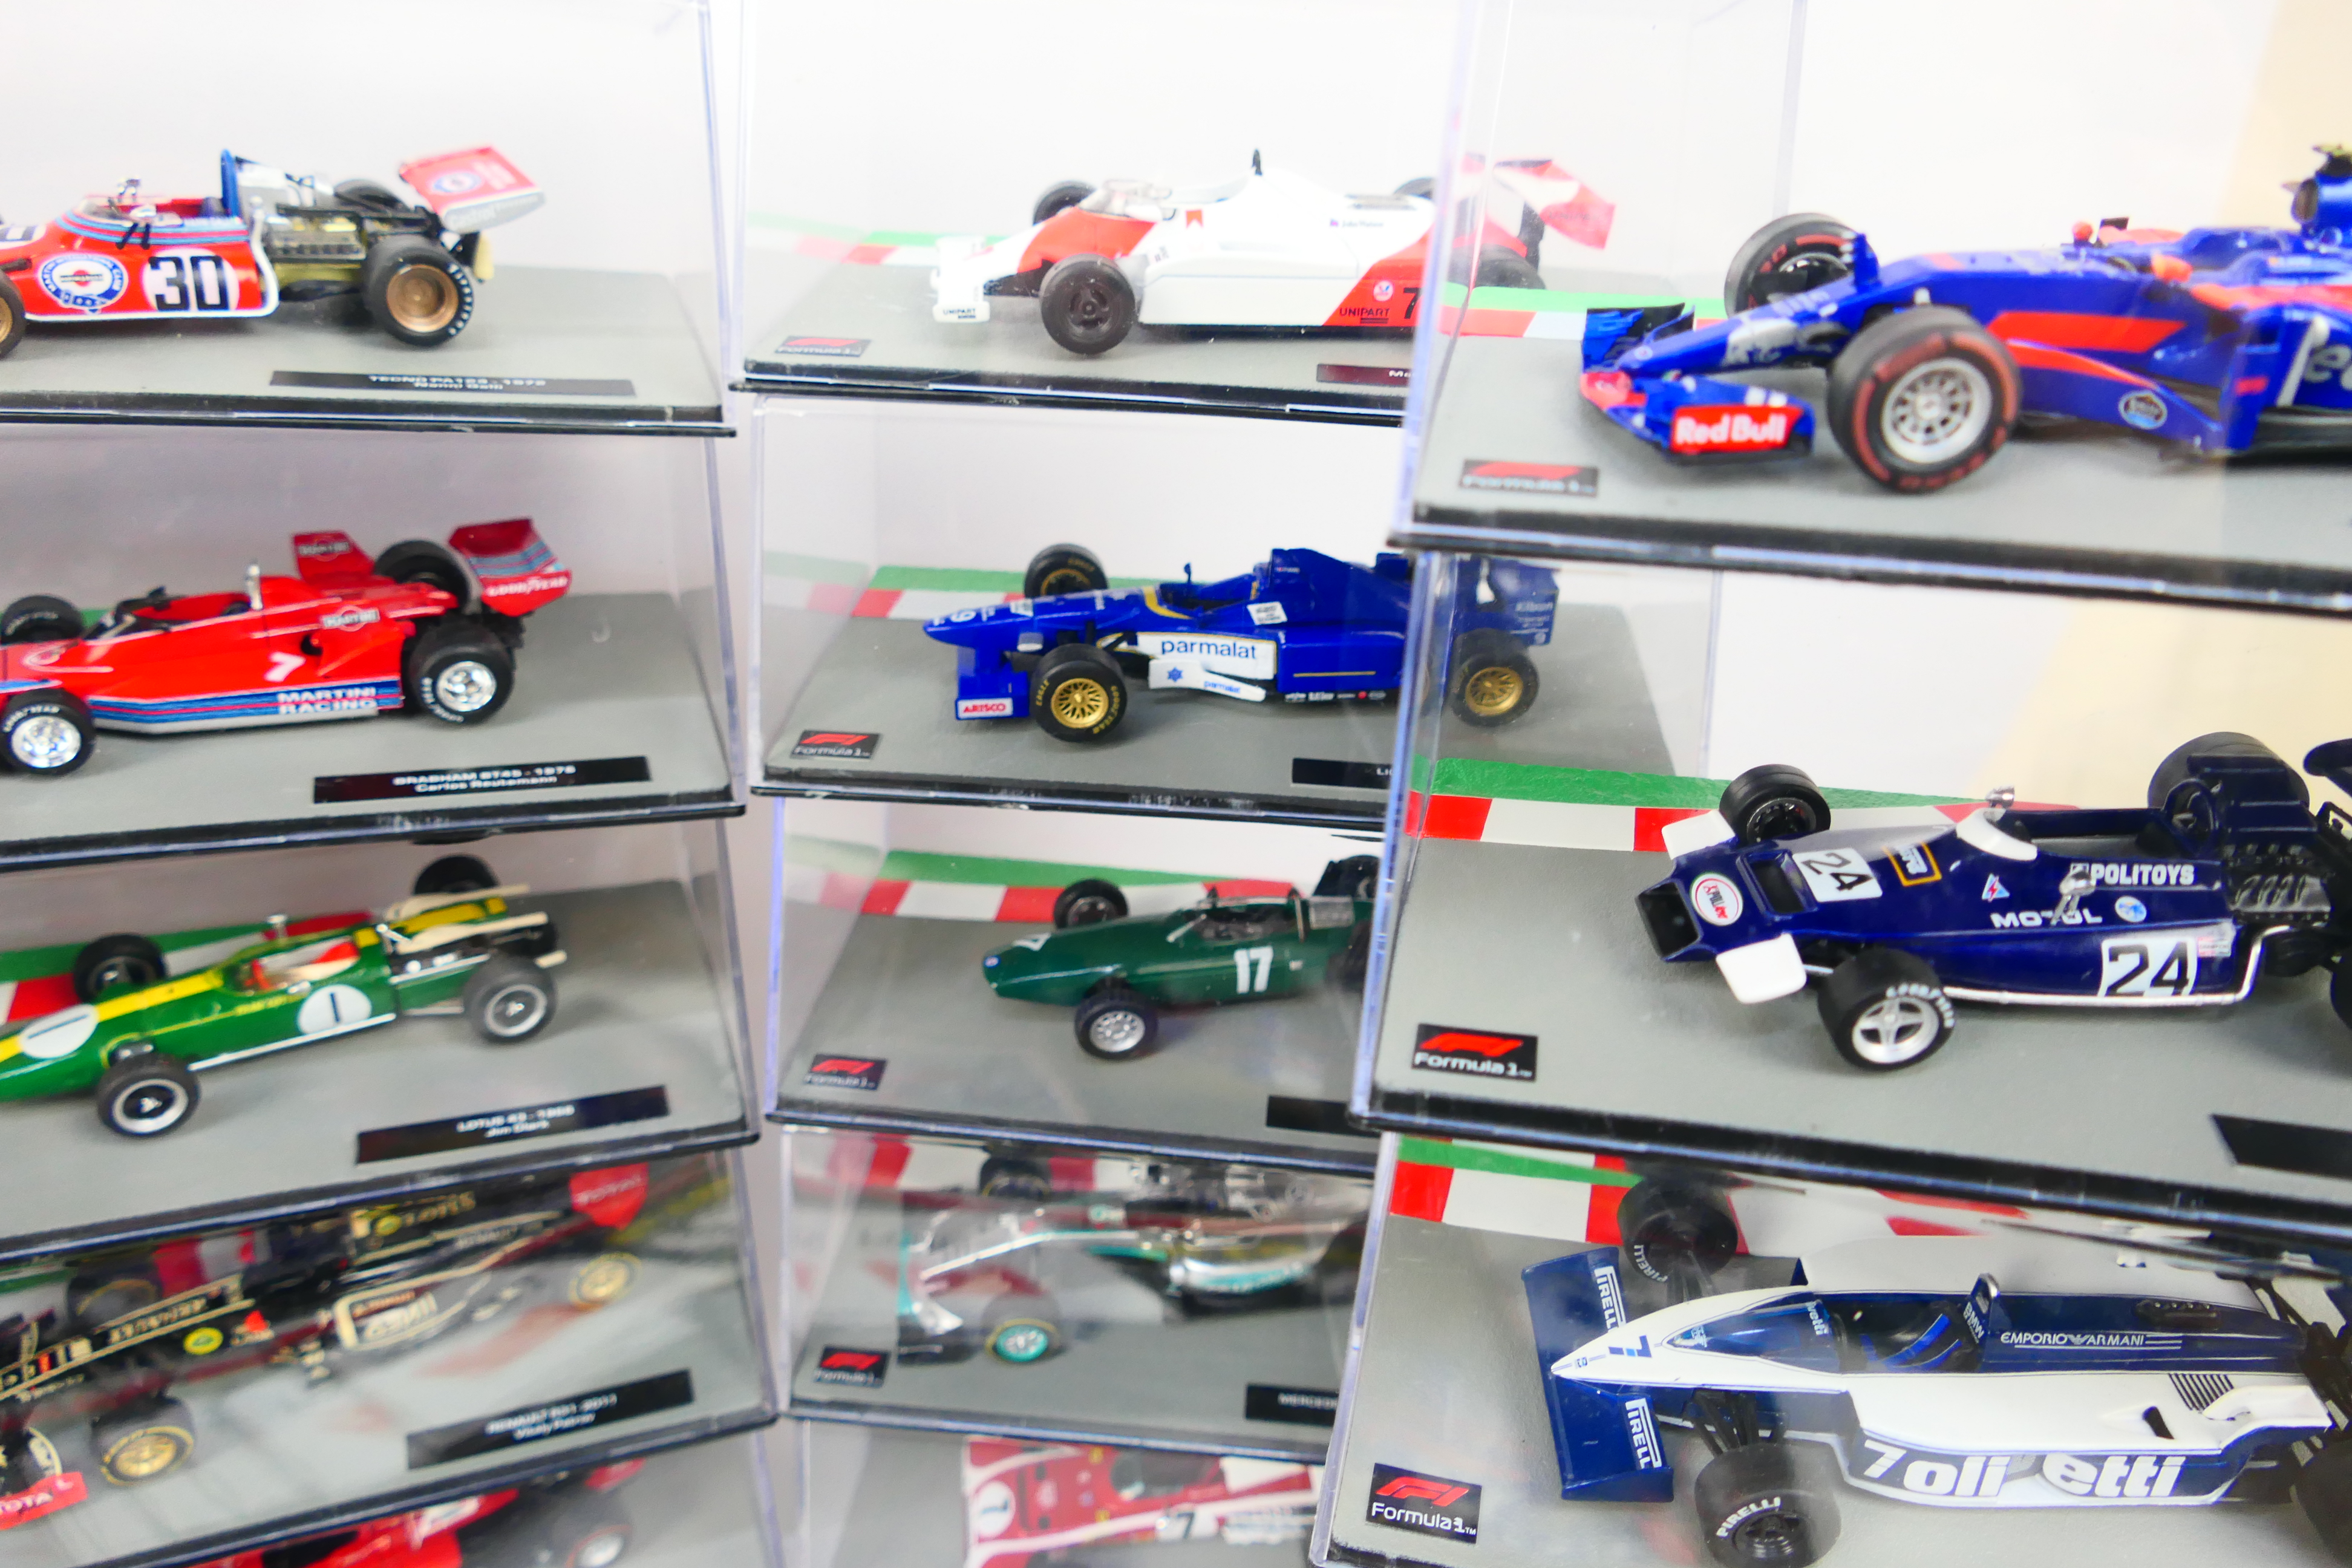 Centauria - Panini - Formula 1 - 35 x models from Formula 1 The Car Collection with the cars and - Image 11 of 14